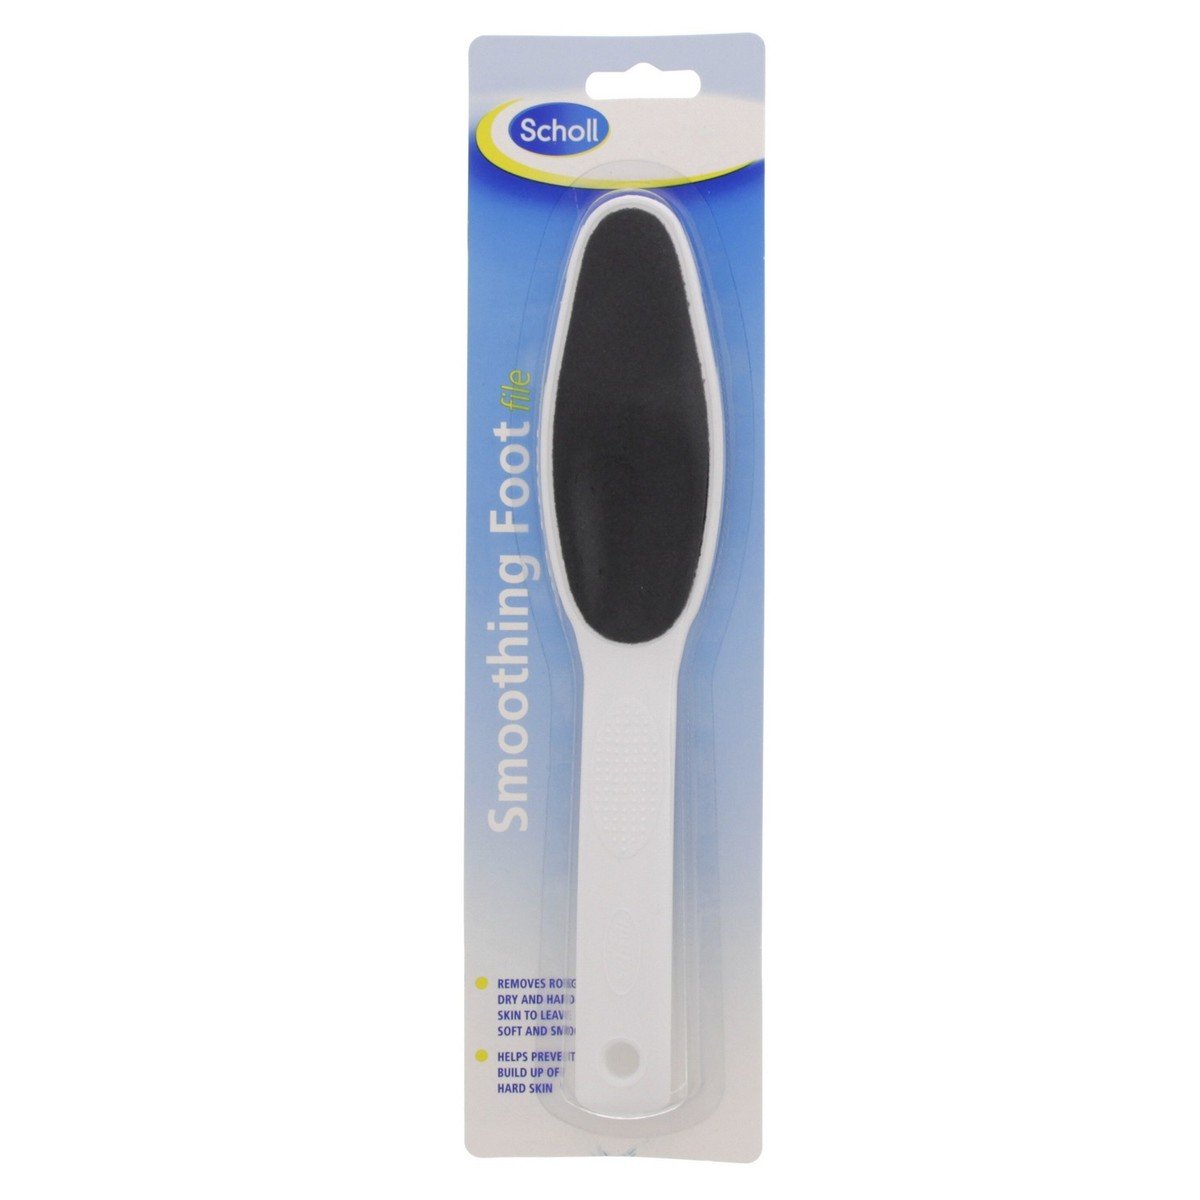 Scholl Smoothing Foot File 1 pc